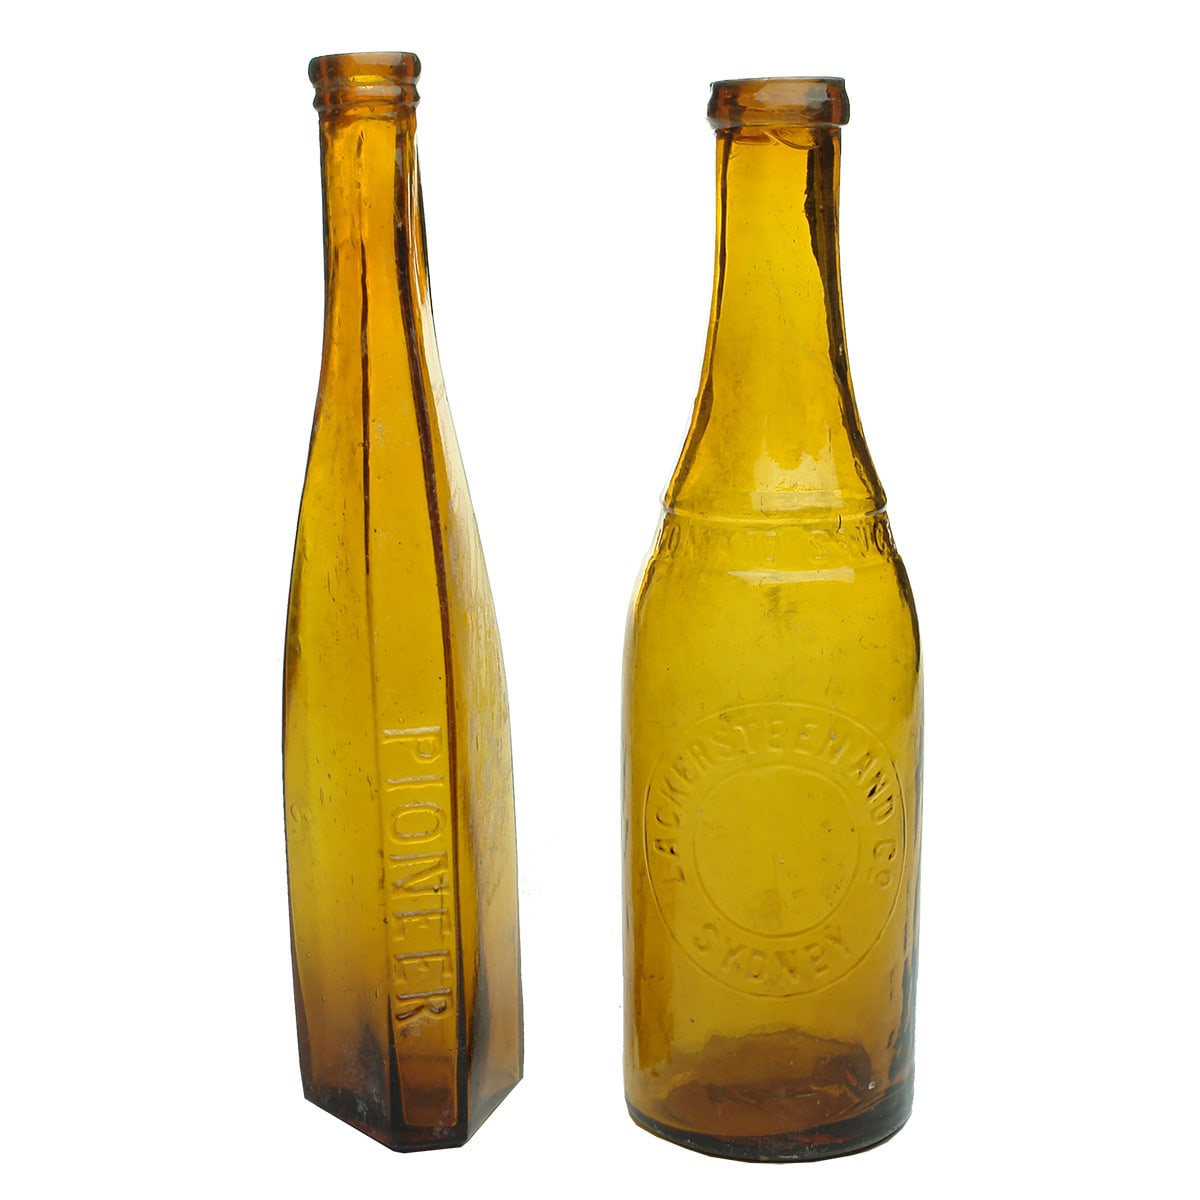 Pair of Light Amber Bottles: Hexagonal Pioneer oil and Lackersteen and Co, Sydney Tomato Sauce.